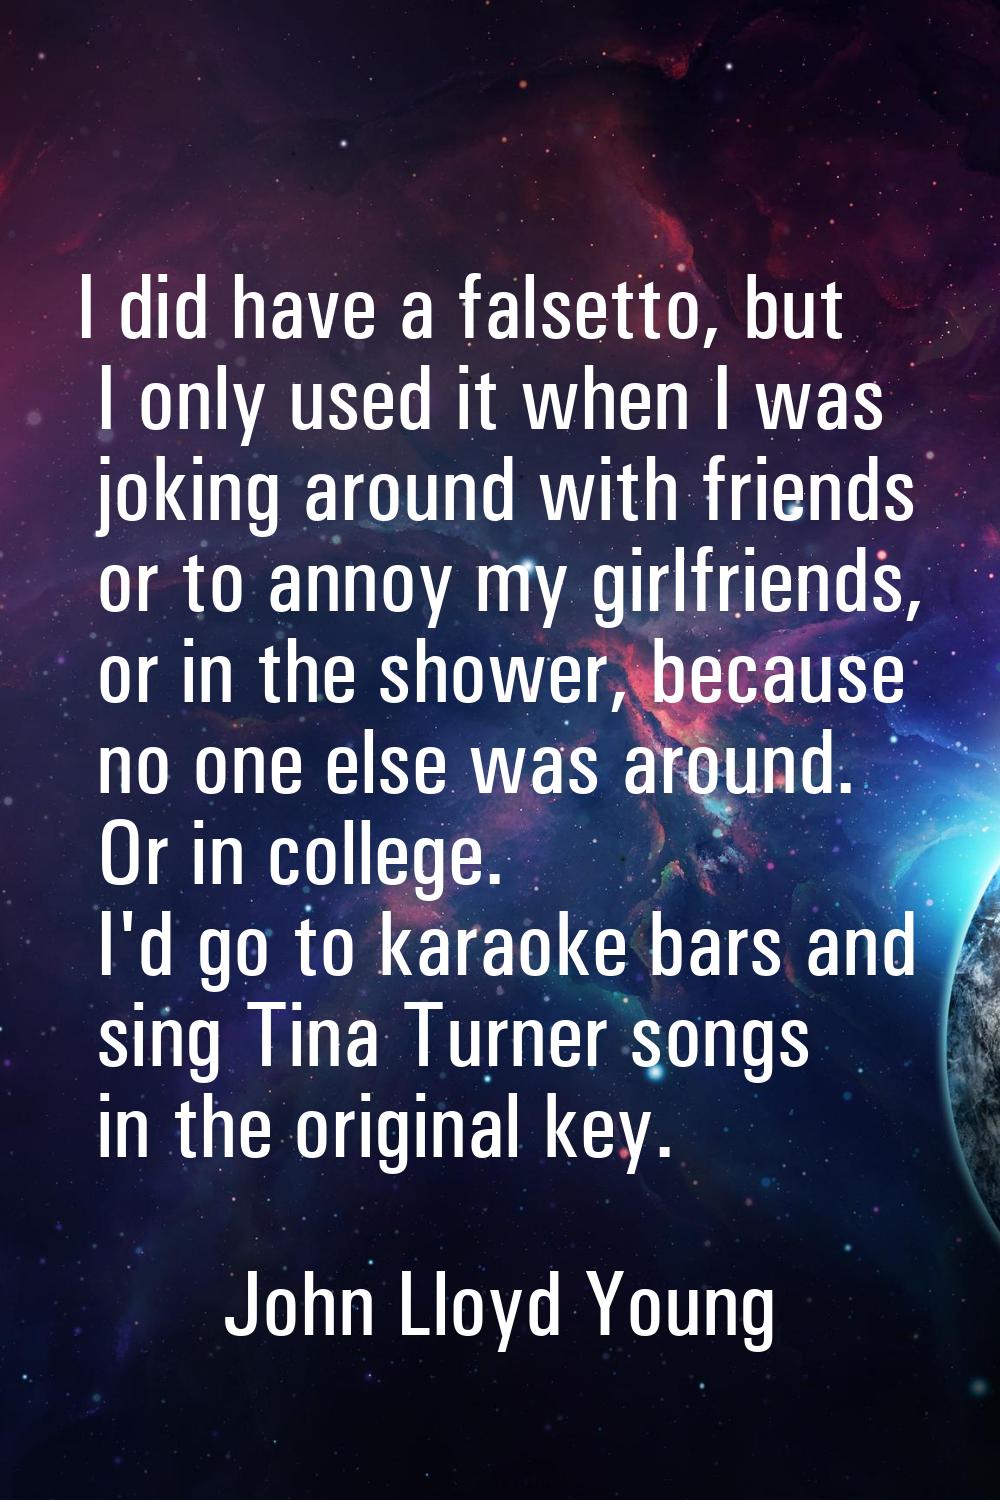 I did have a falsetto, but I only used it when I was joking around with friends or to annoy my girl